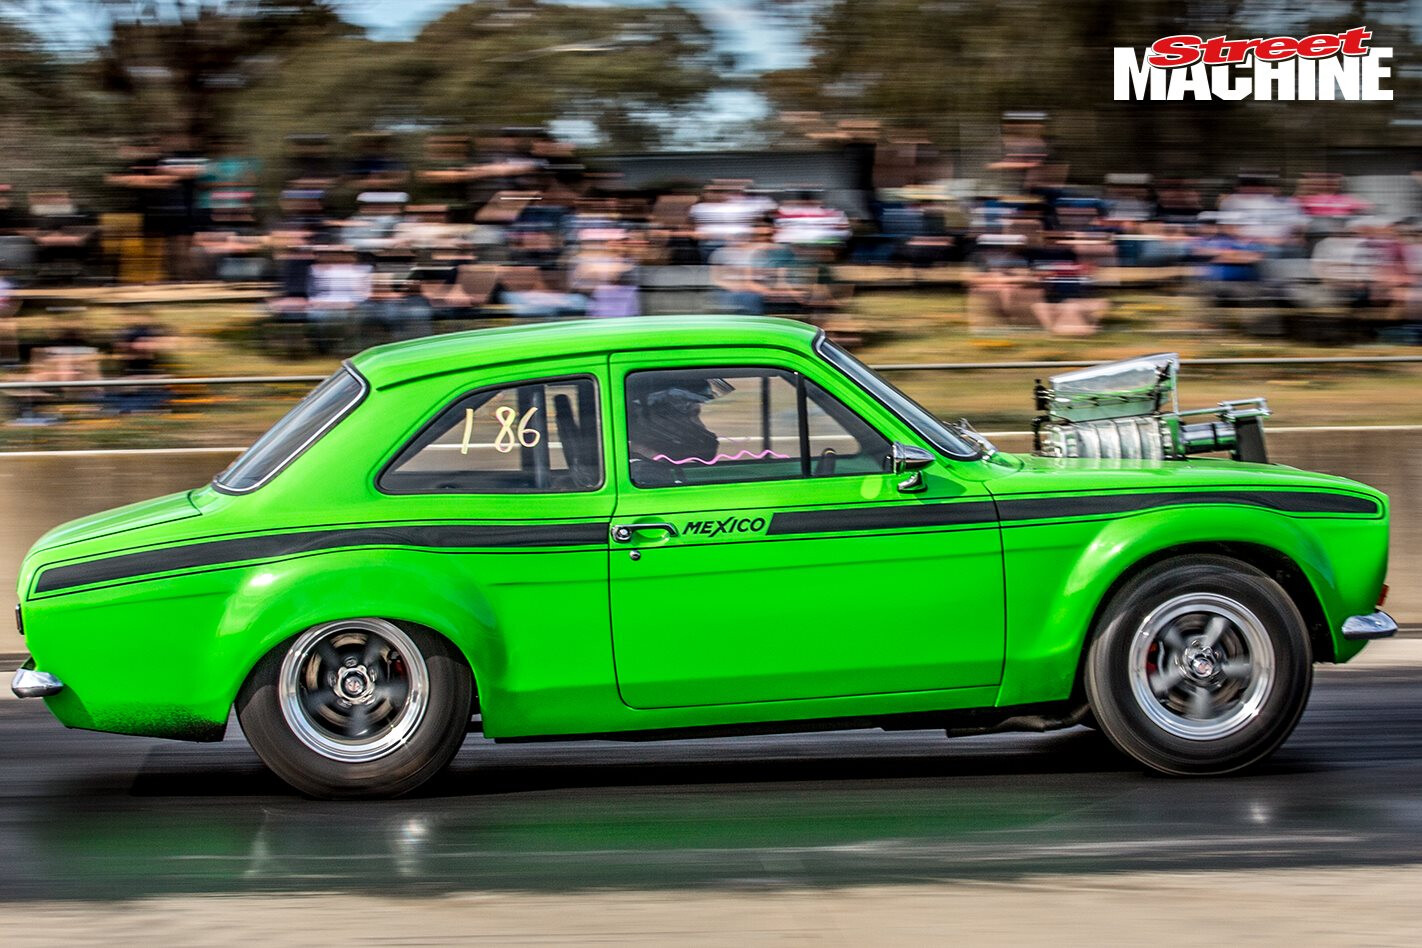 Blown 253 Escort at the drags – Video